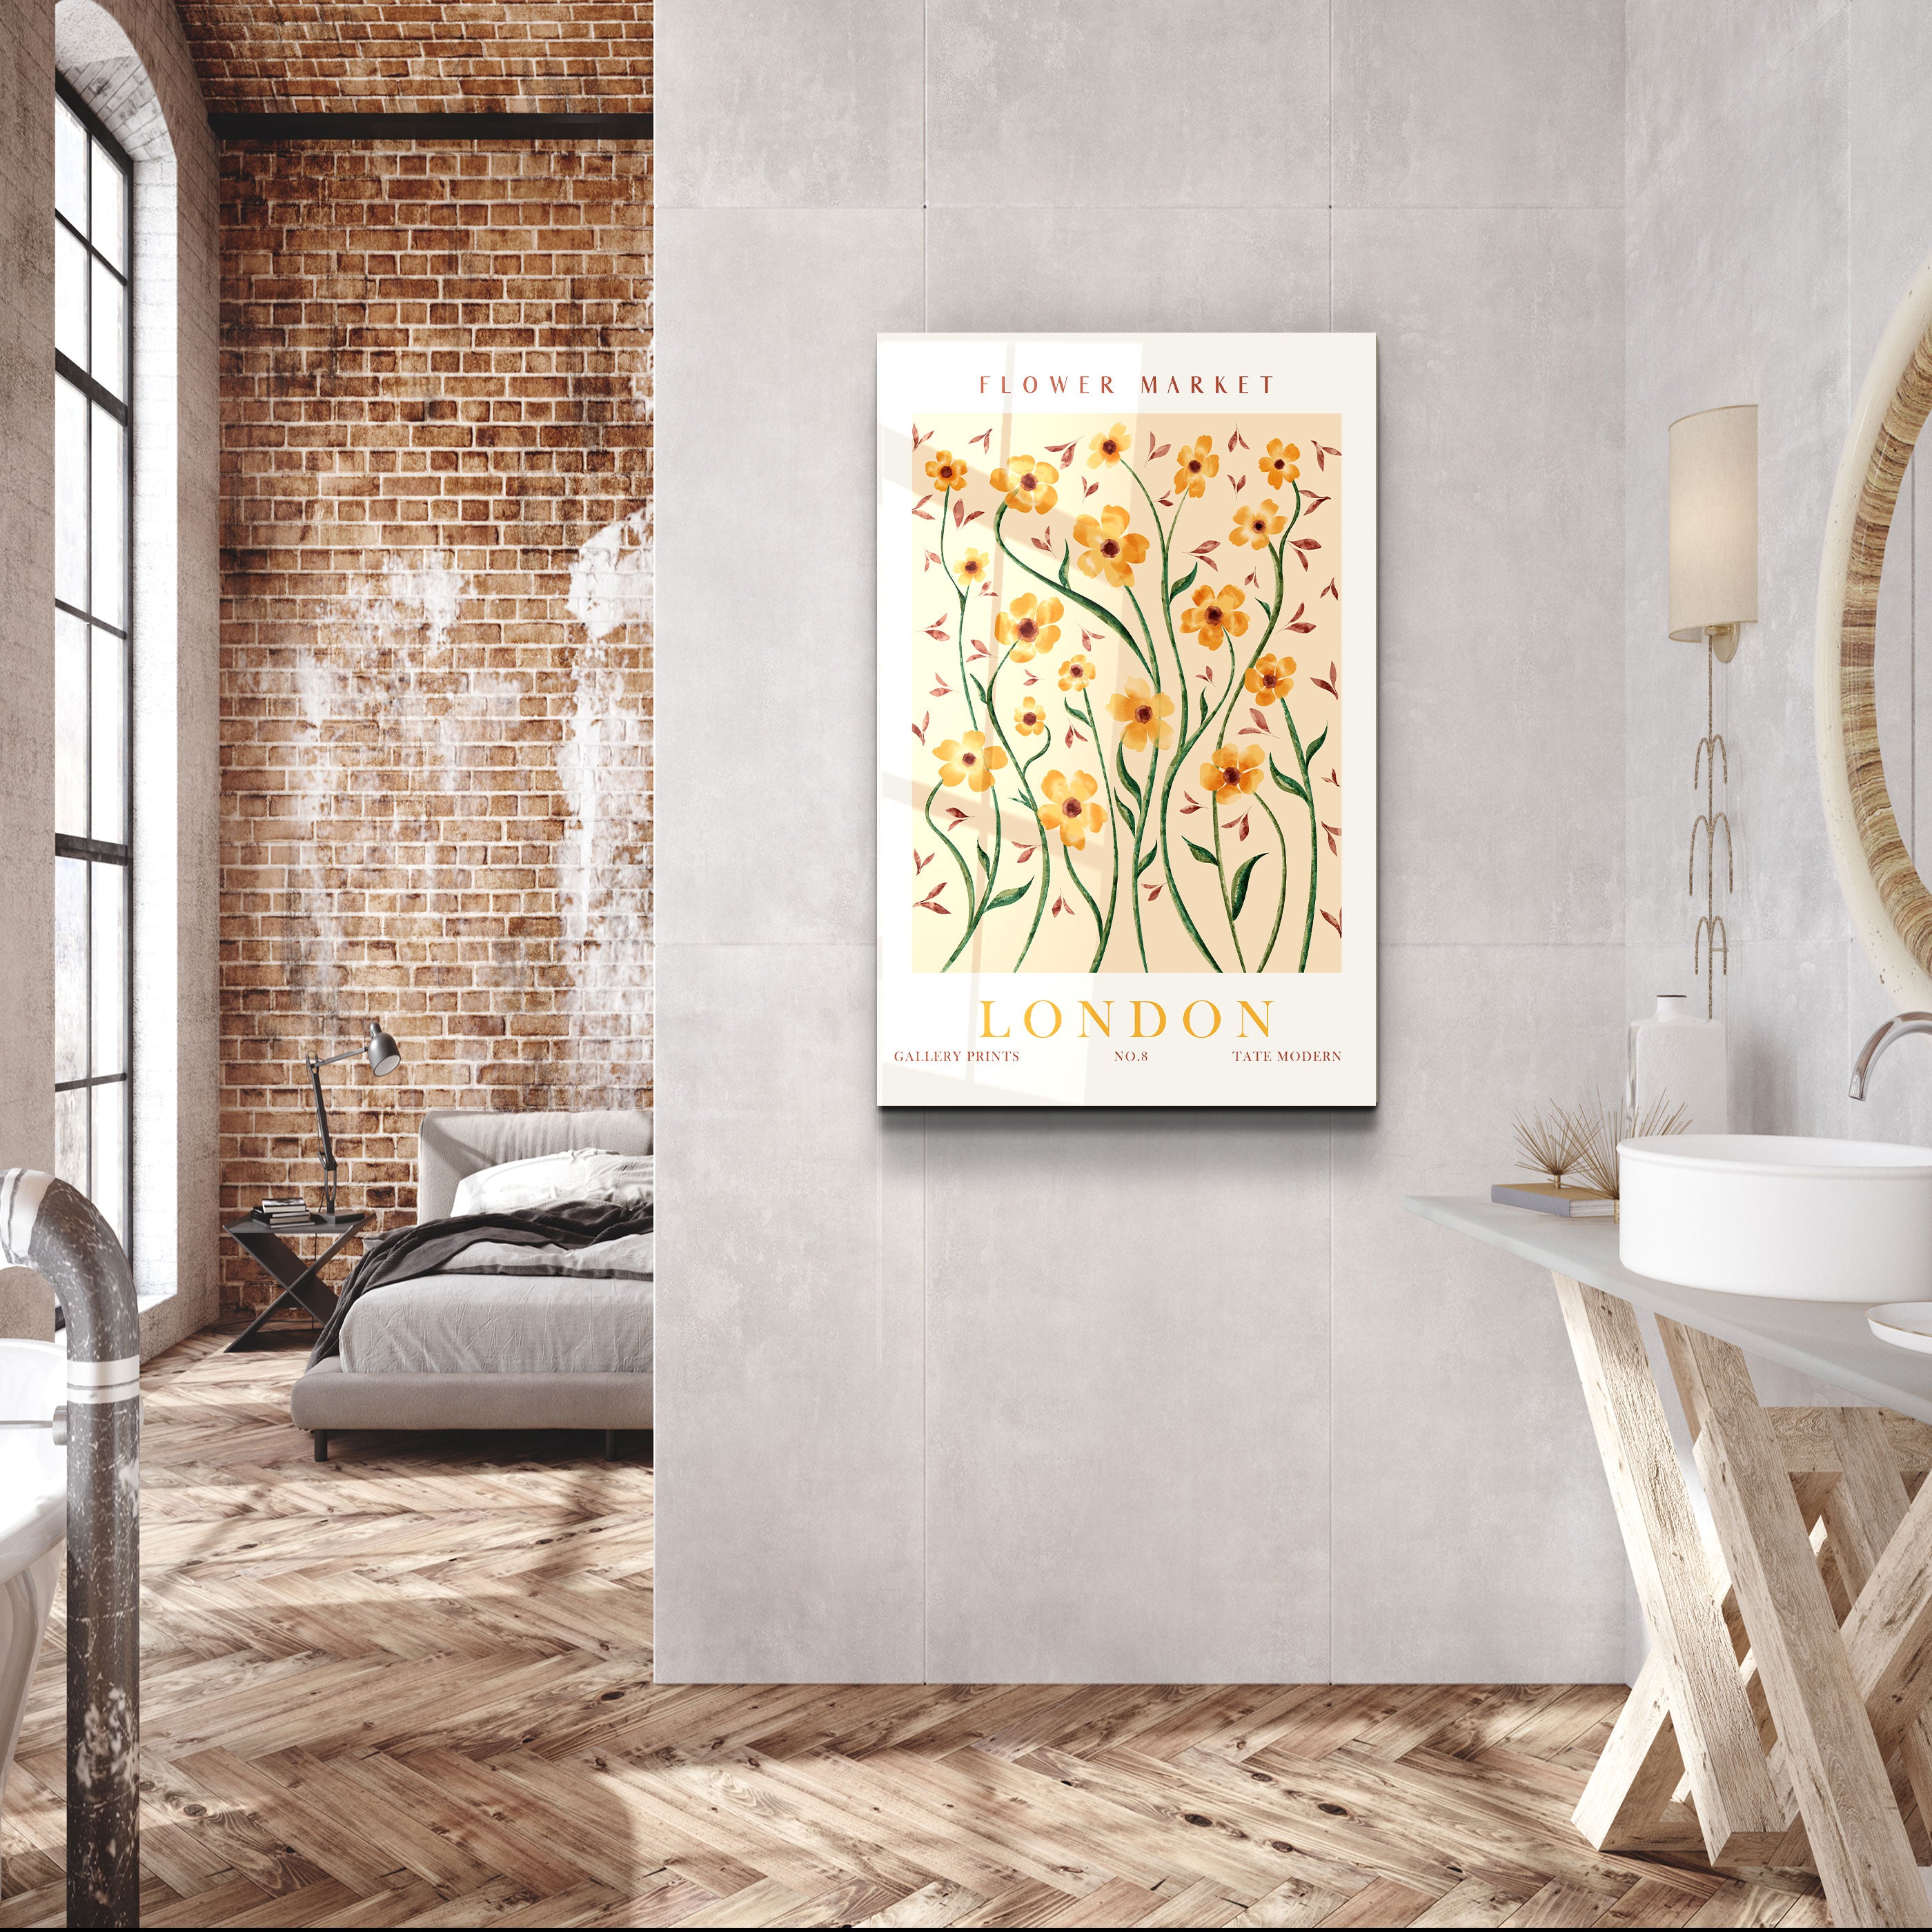 ・"Flower Market No:8 London"・Gallery Print Collection Glass Wall Art